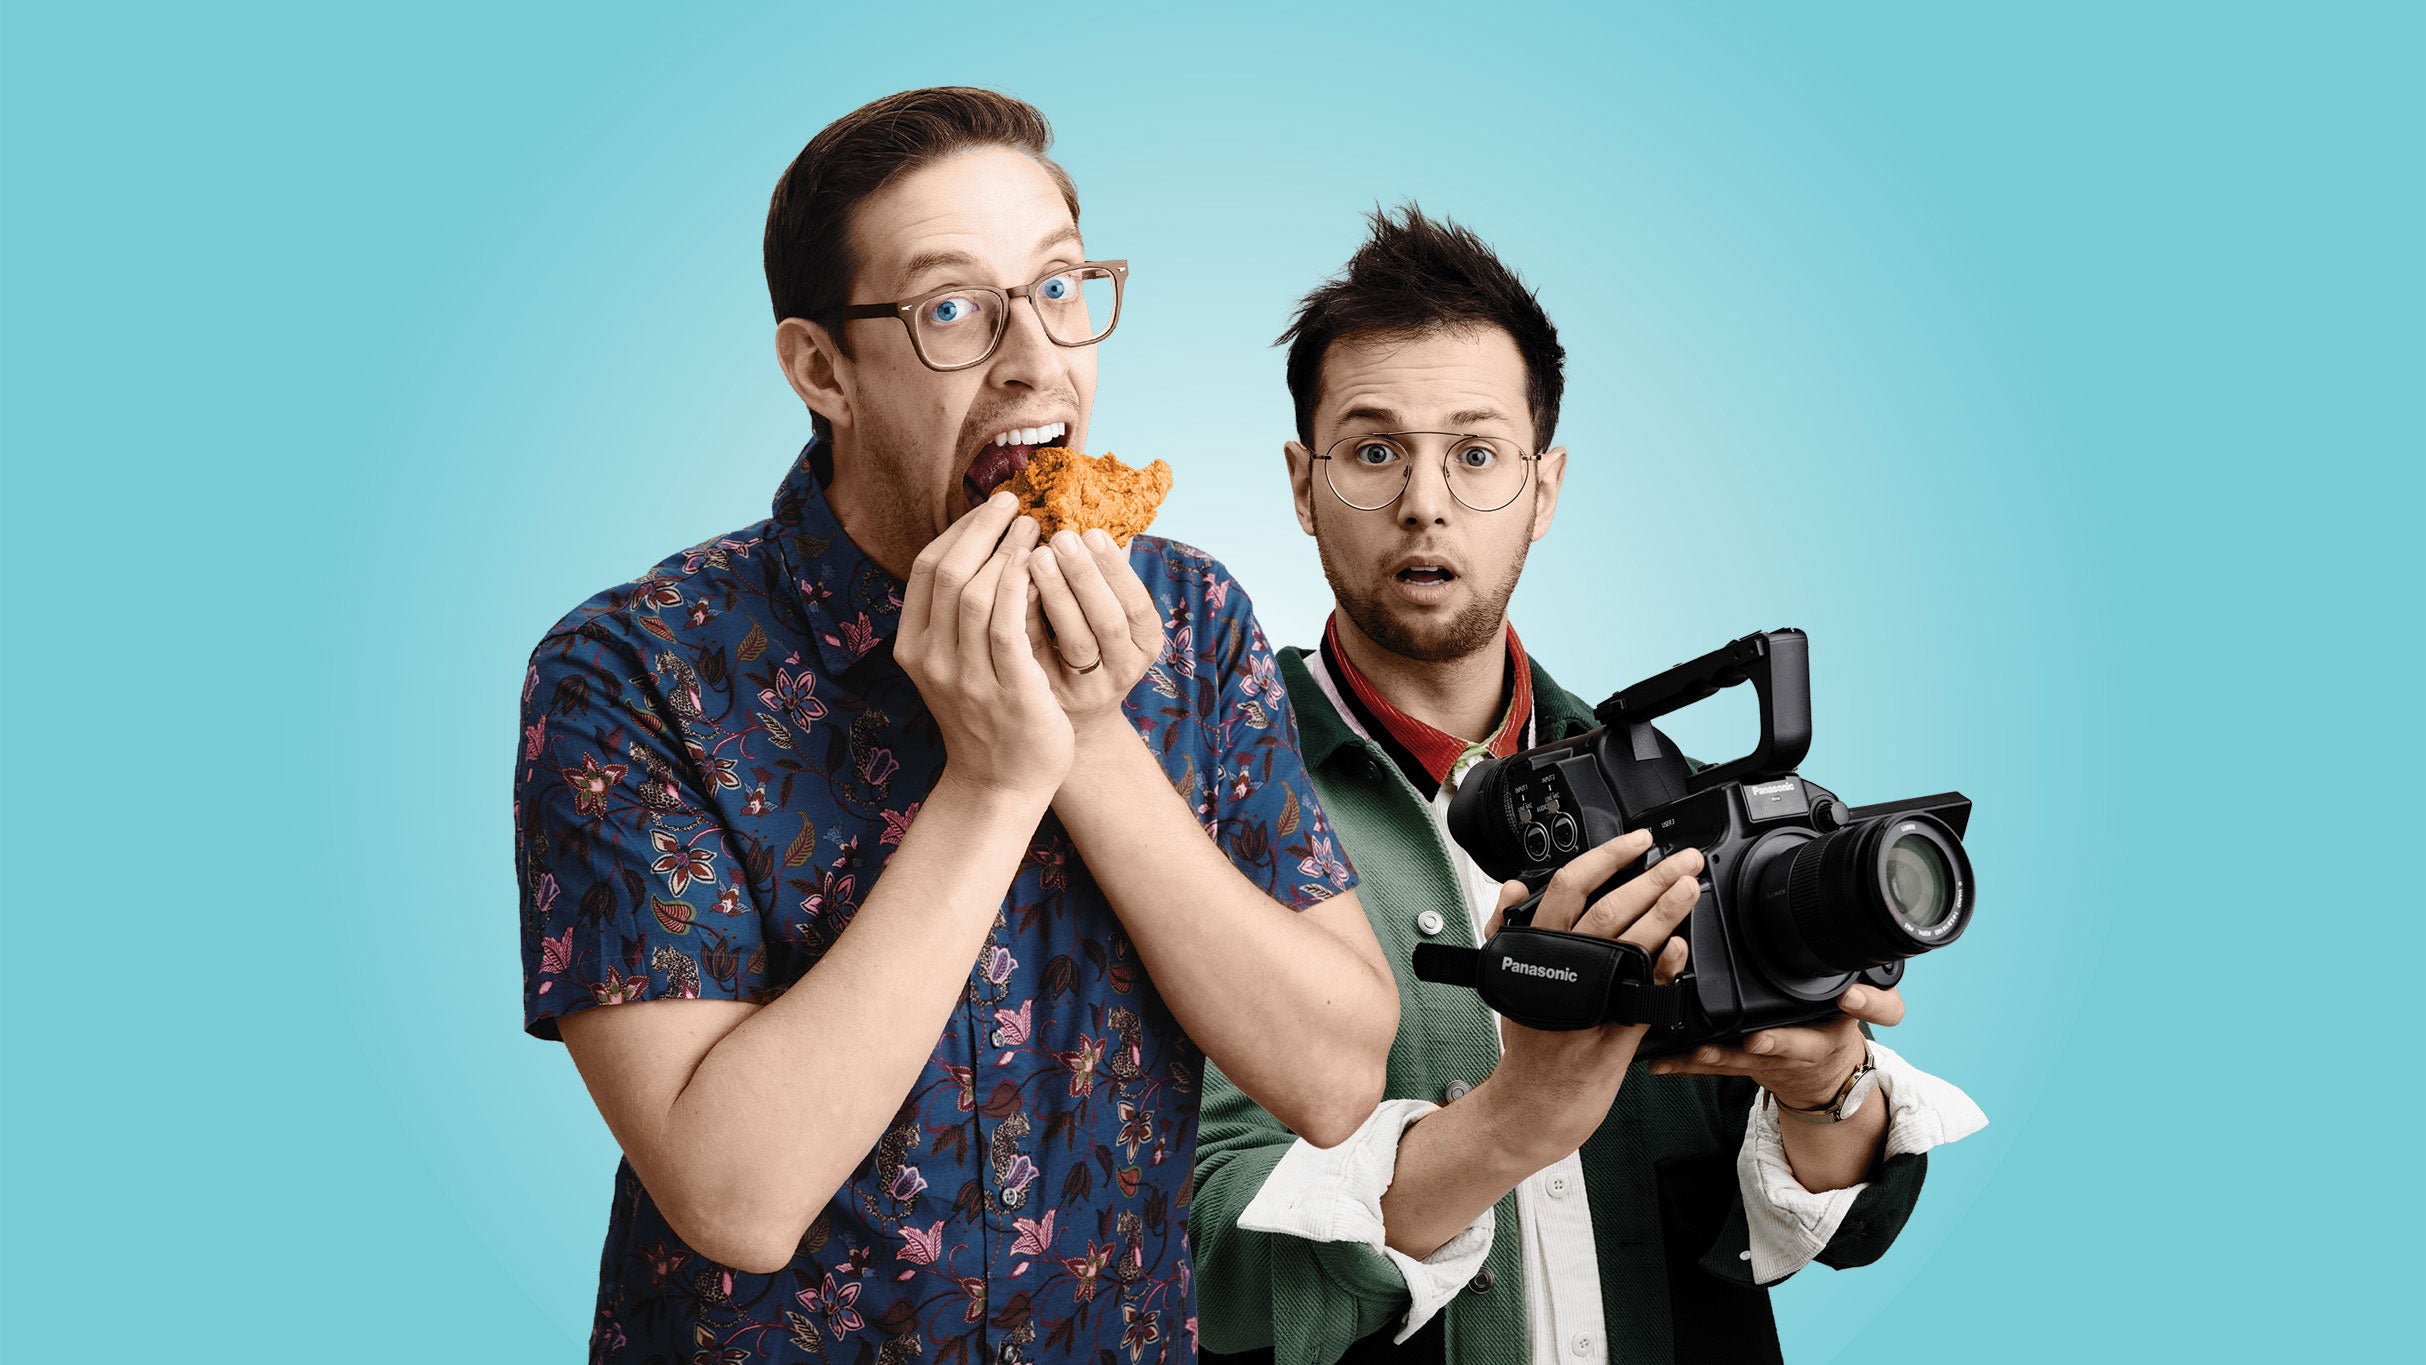 The Try Guys: Eat The Menu Tour presale code